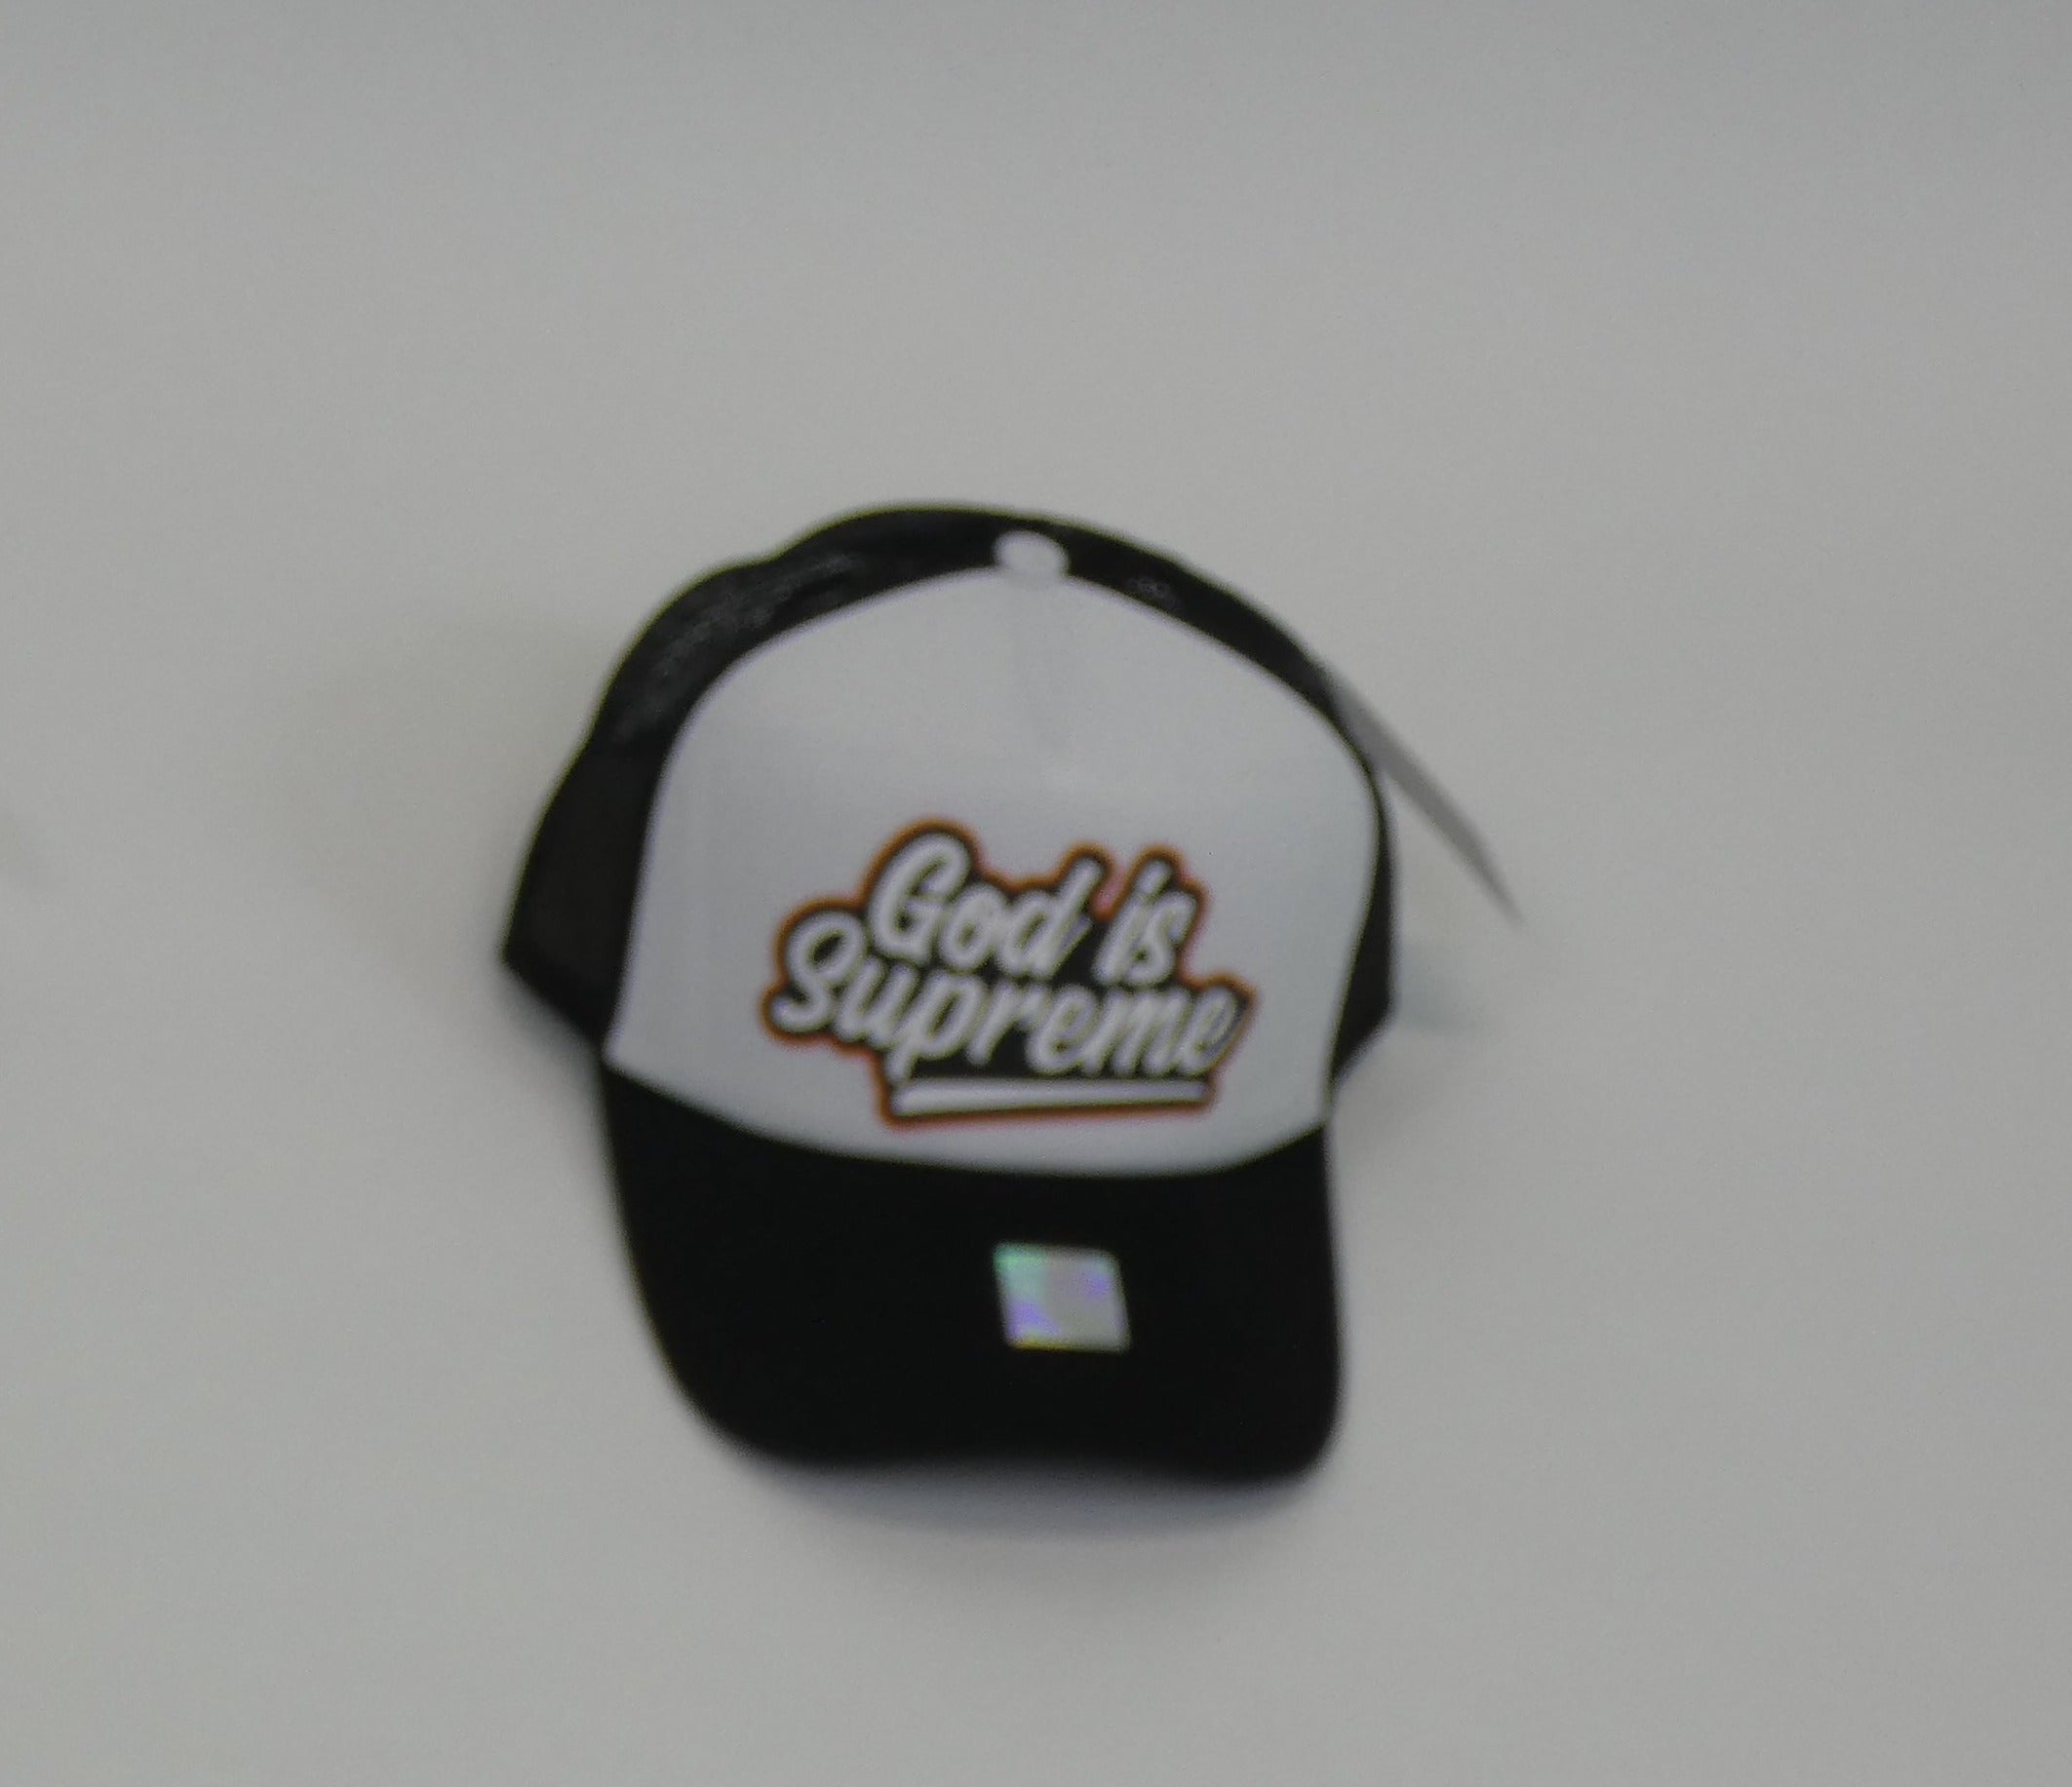 God is Supreme Follow Your Dream White and Black (Trucker Hat)